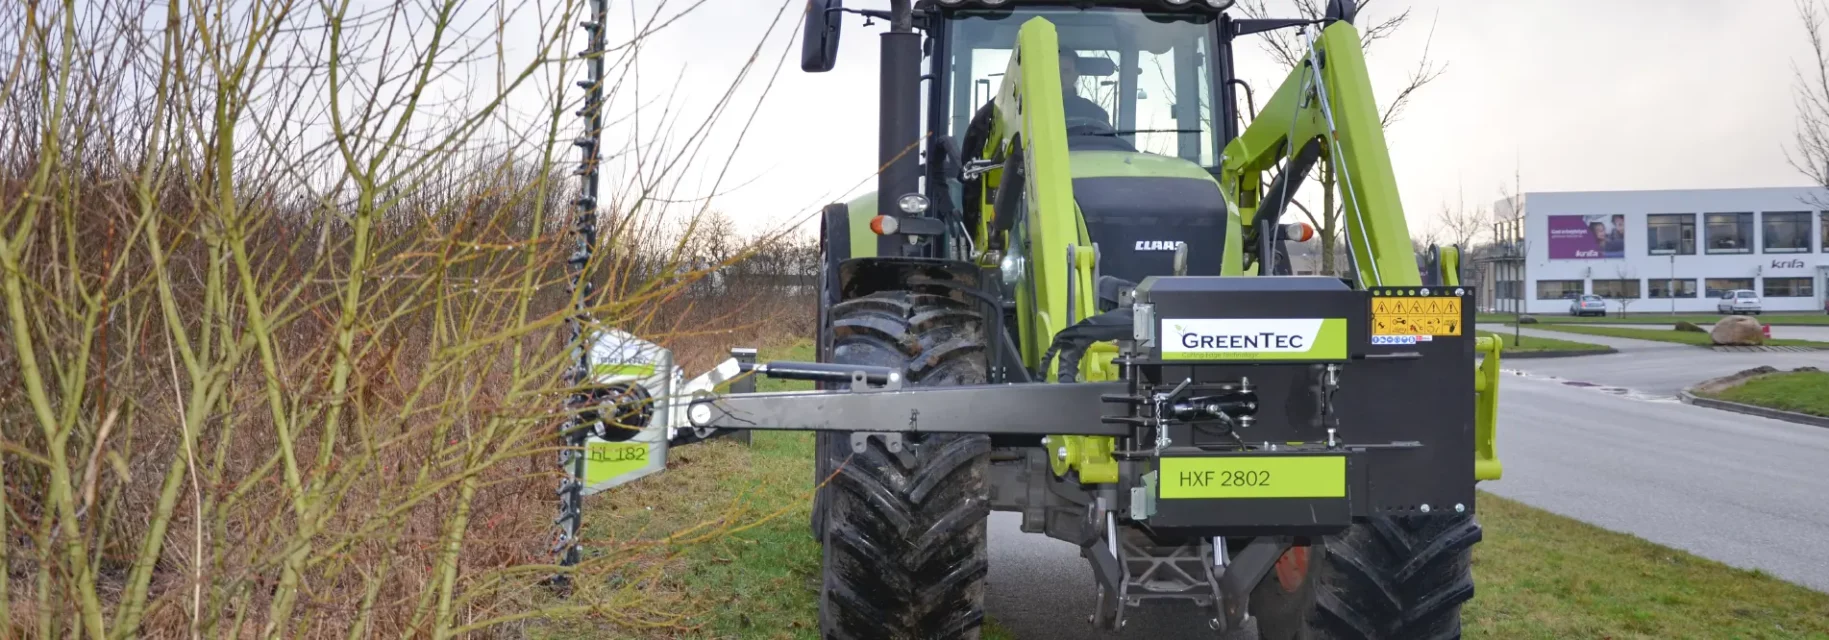 Hedge cutter attachment for tractor